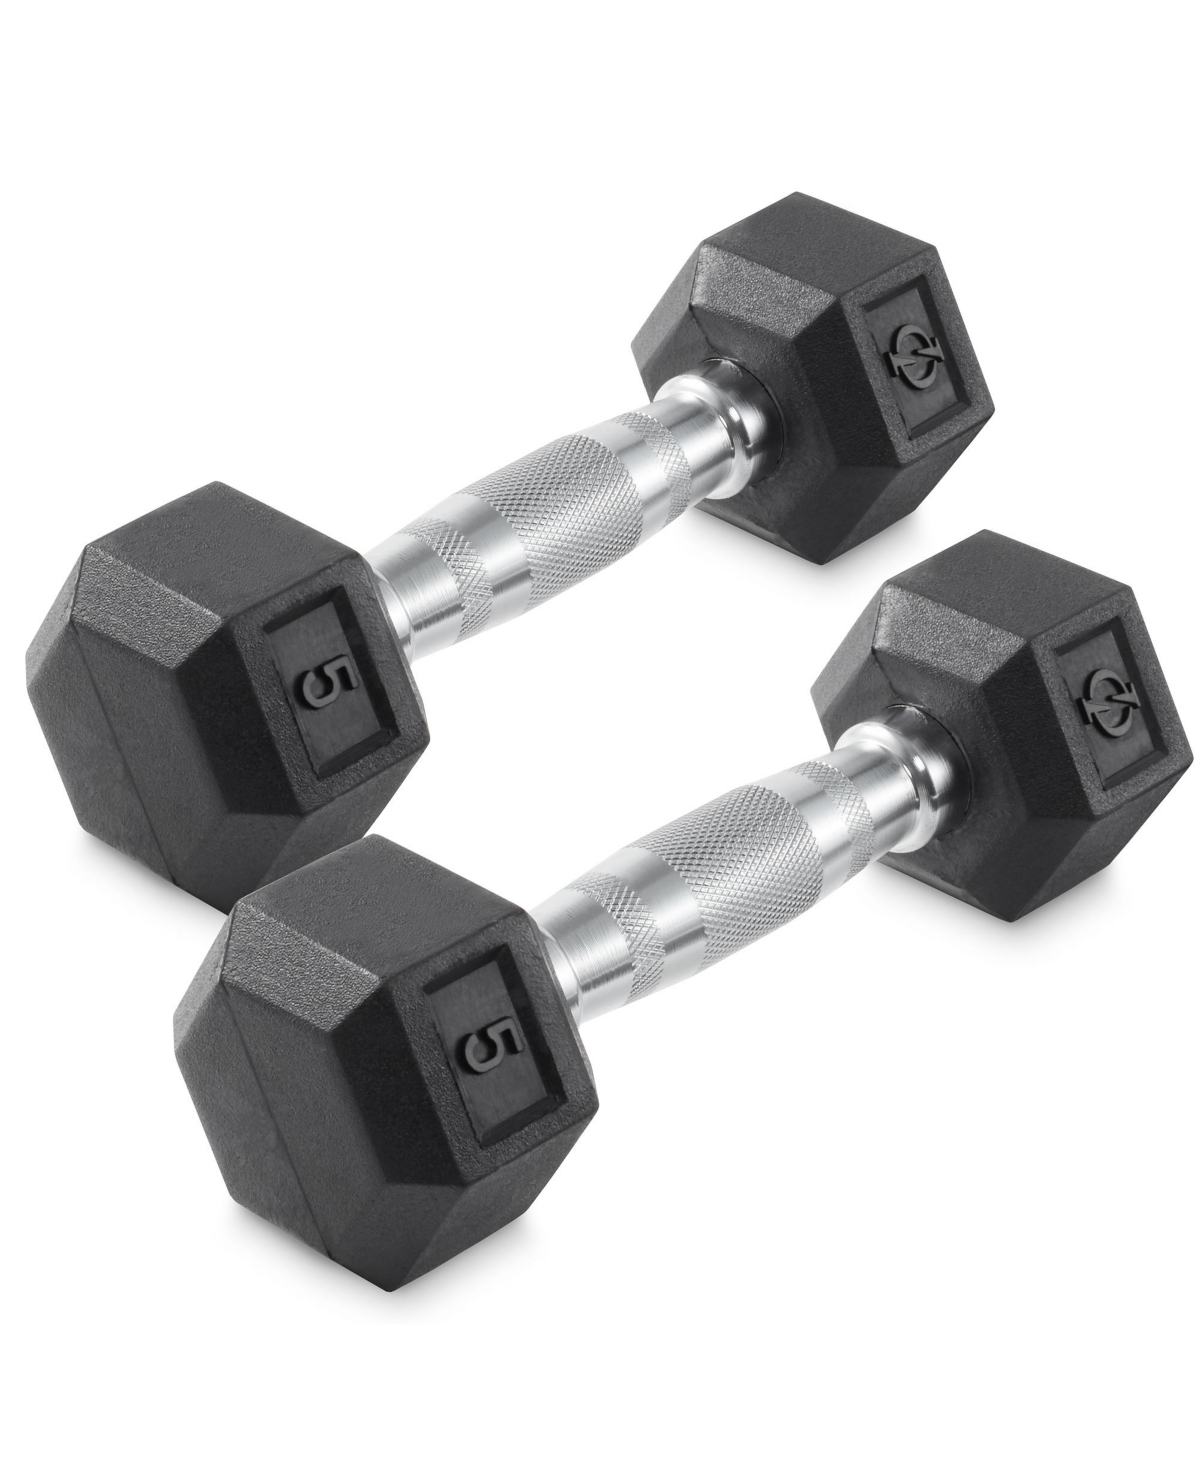 Rubber Coated Hex Dumbbell Hand Weights, 5 lb Pair - Black